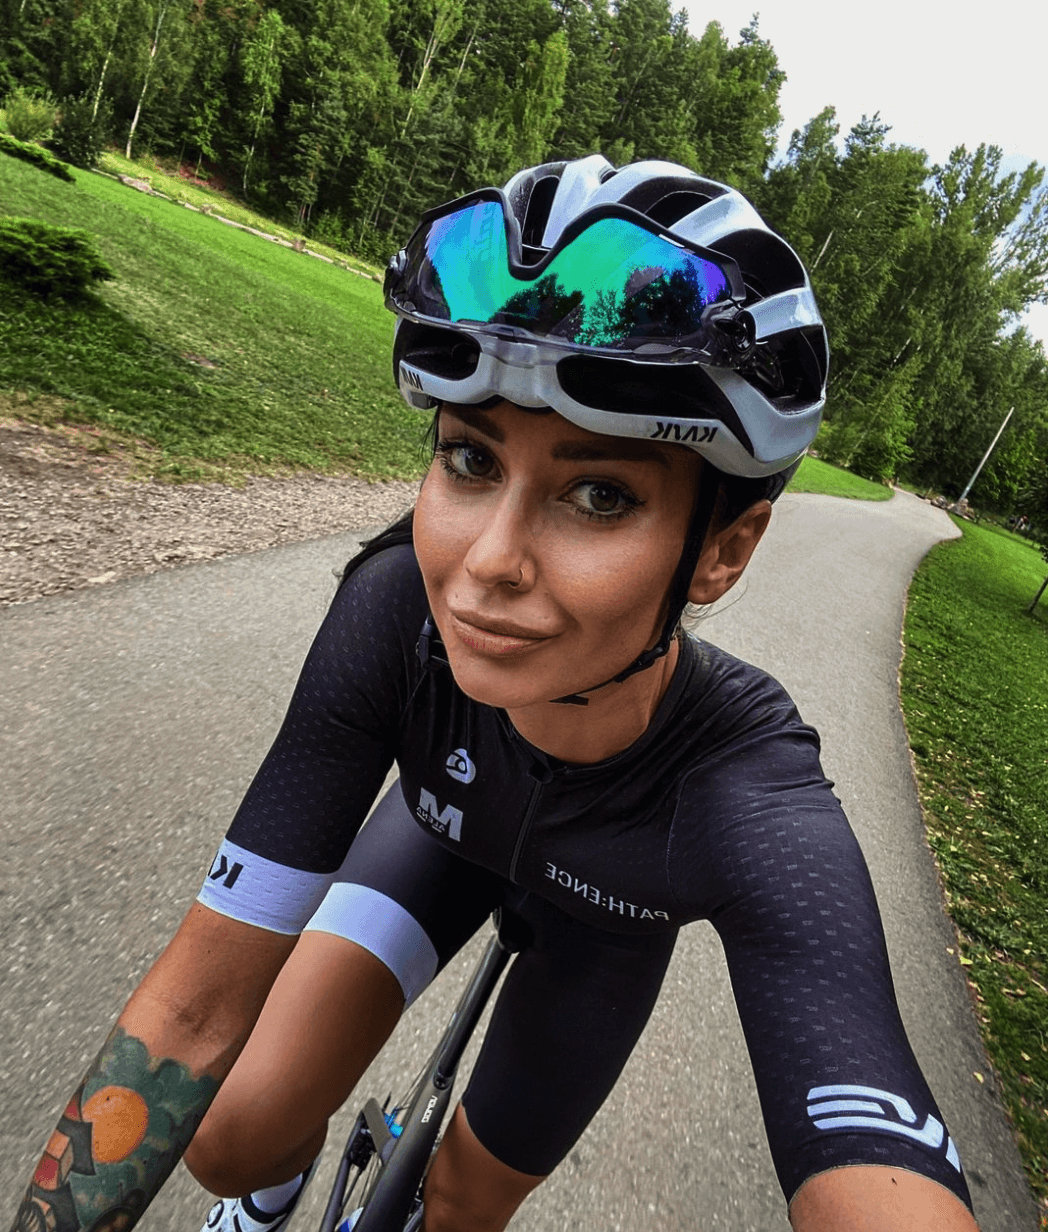 ROUVY Ambassador Malena Nowotarska riding her bike on a narrow tarmac road in the forest